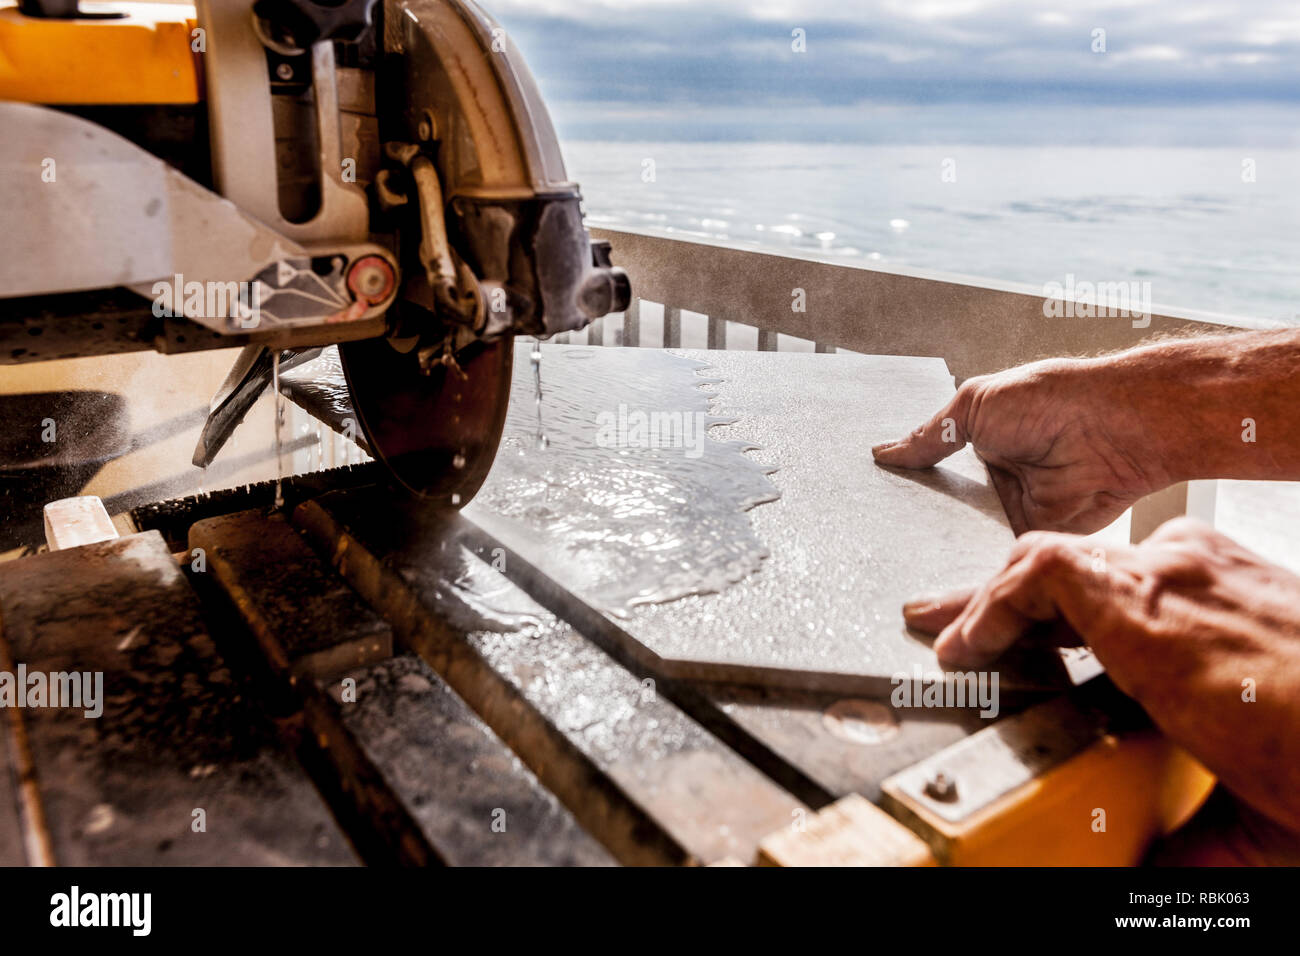 Man Cutting Tile With Wet Saw Stock Photo